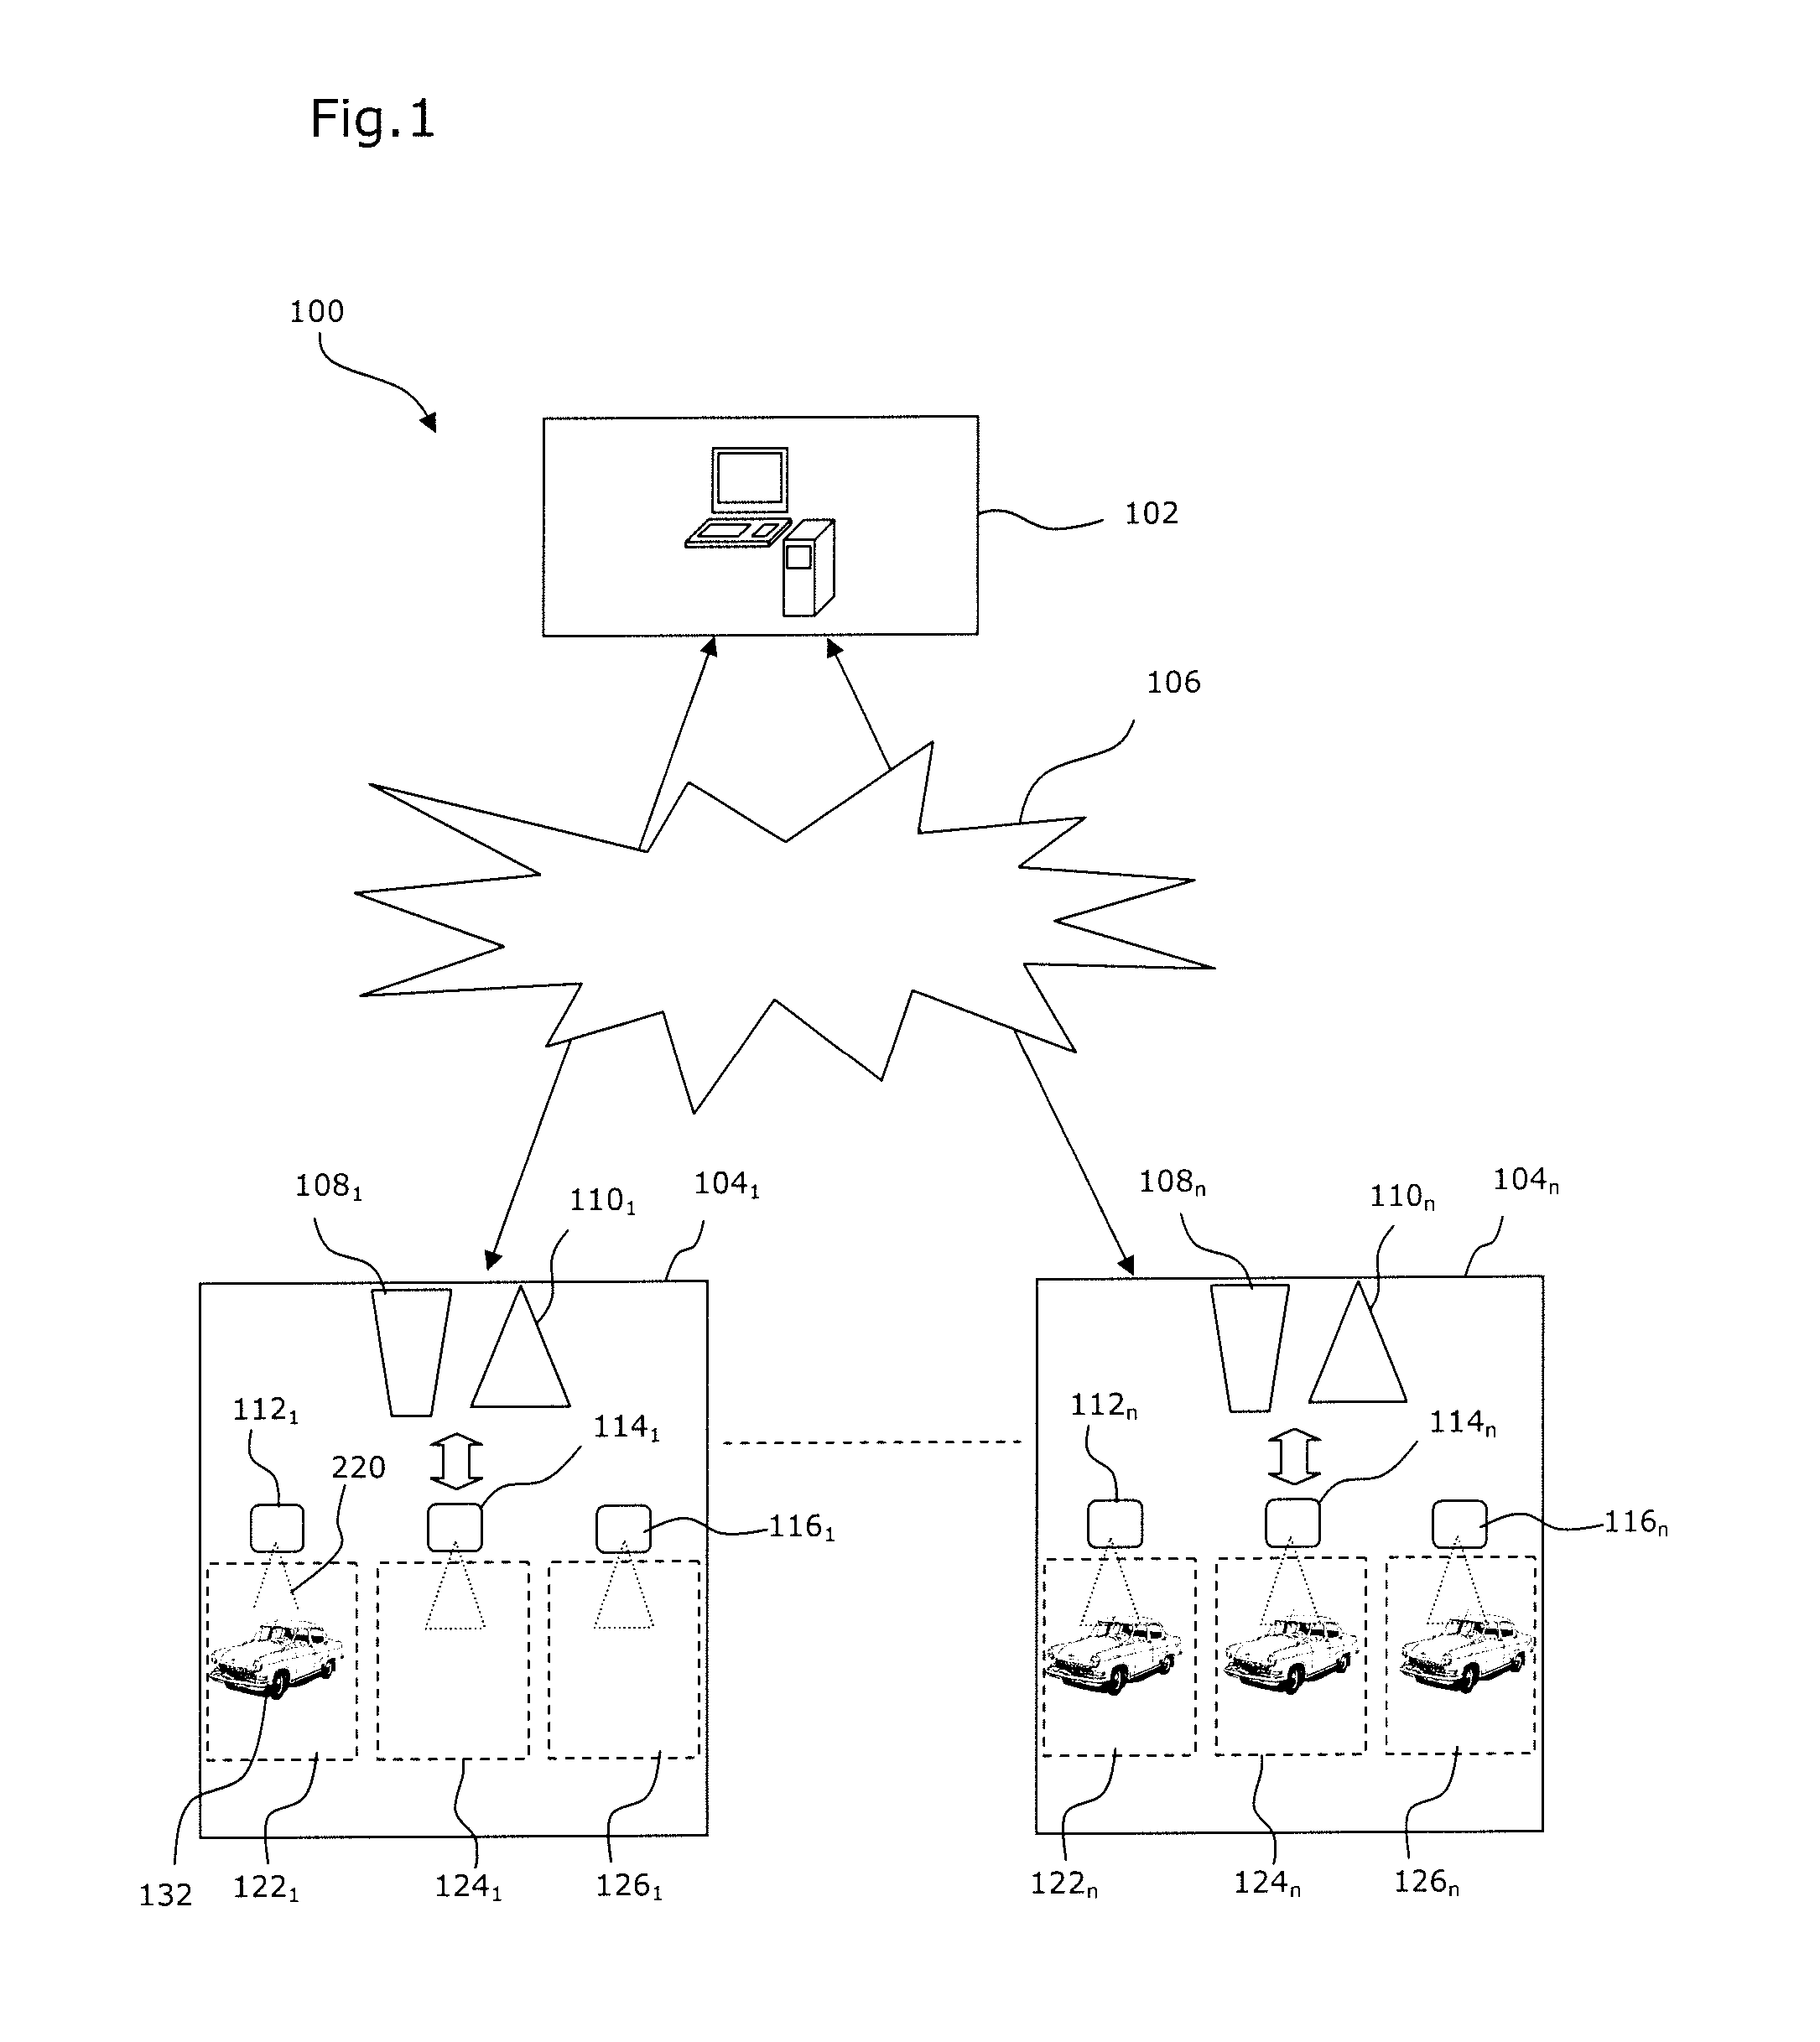 Method And System For Managing A Power-Charging Space For A Vehicle, Especially A Self-Service Electrical Vehicle